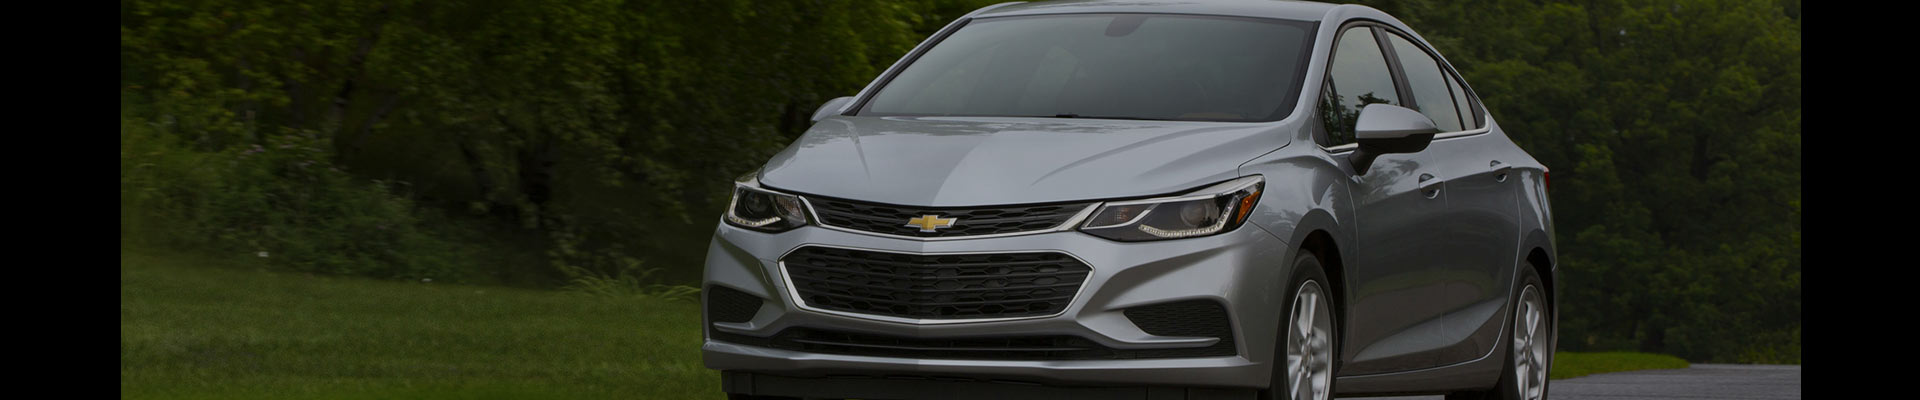 Shop Replacement and OEM 2016 Chevrolet Cruze Parts with Discounted Price on the Net